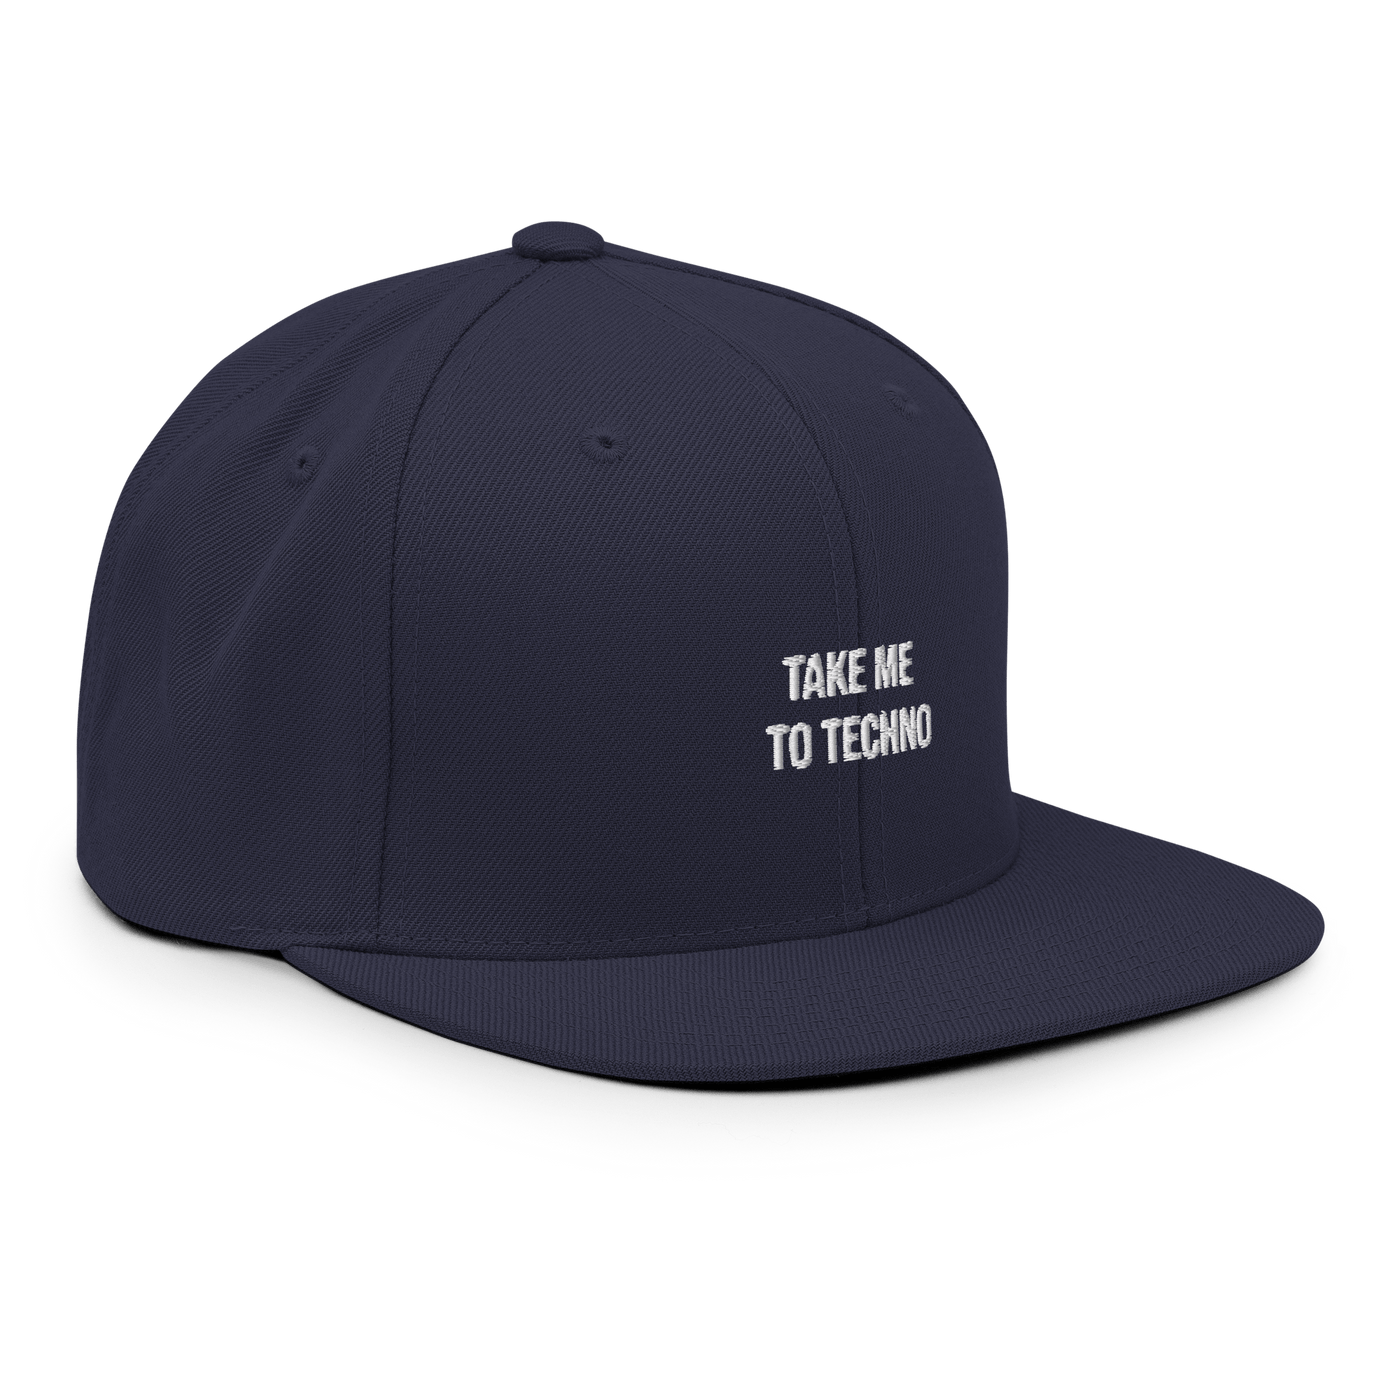 Take me to techno Snapback - Navy - - Just Another Cap Store